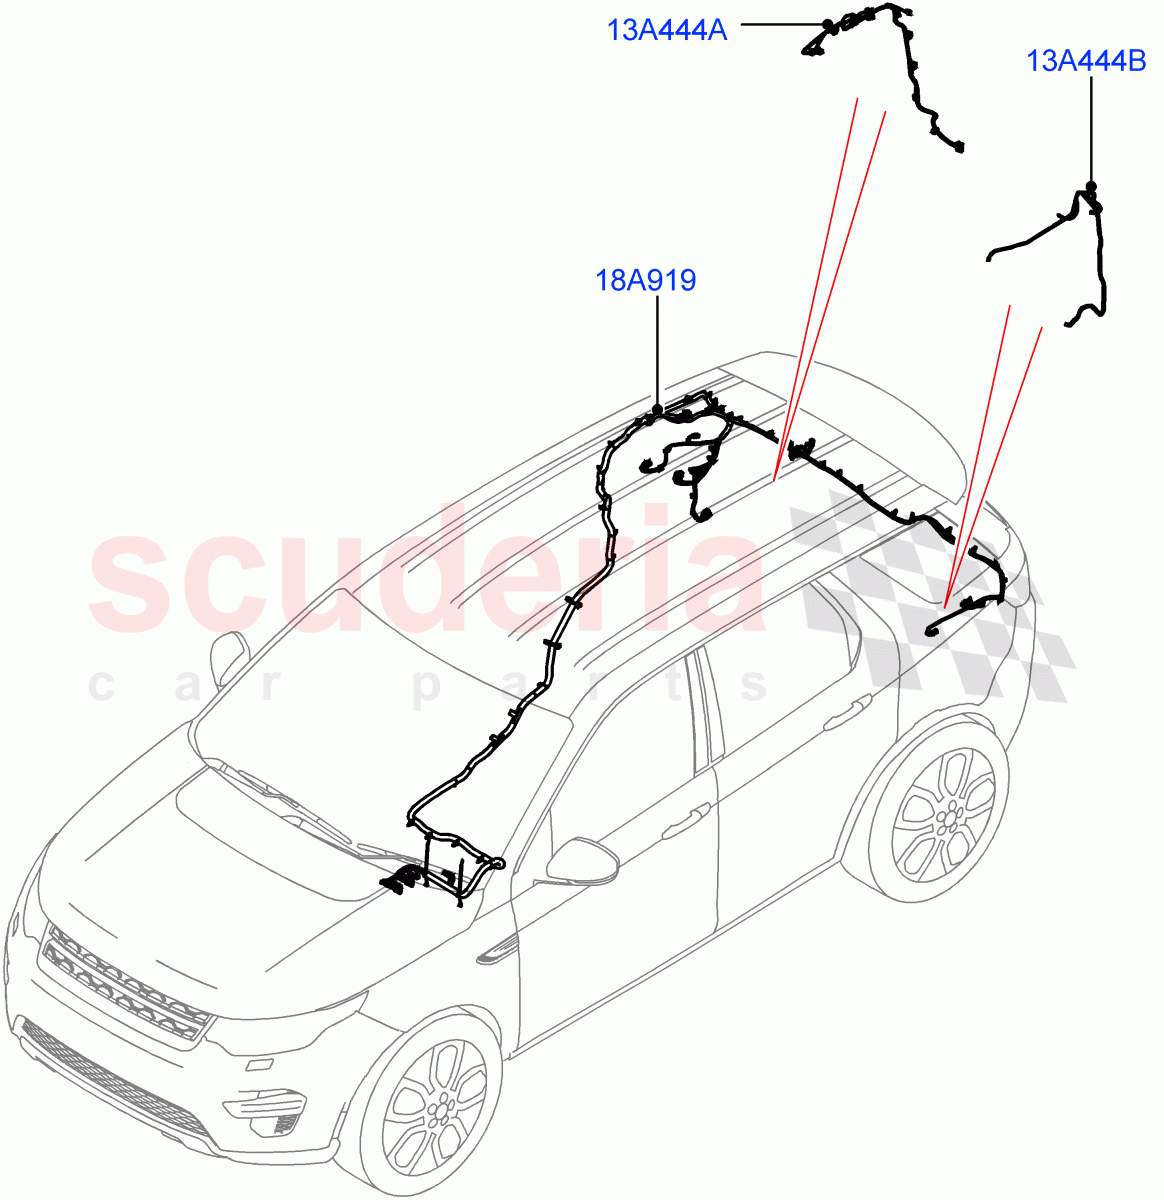 Electrical Wiring - Body And Rear(Audio/Navigation/Entertainment)(Halewood (UK))((V)TOKH999999) of Land Rover Land Rover Discovery Sport (2015+) [2.0 Turbo Petrol AJ200P]